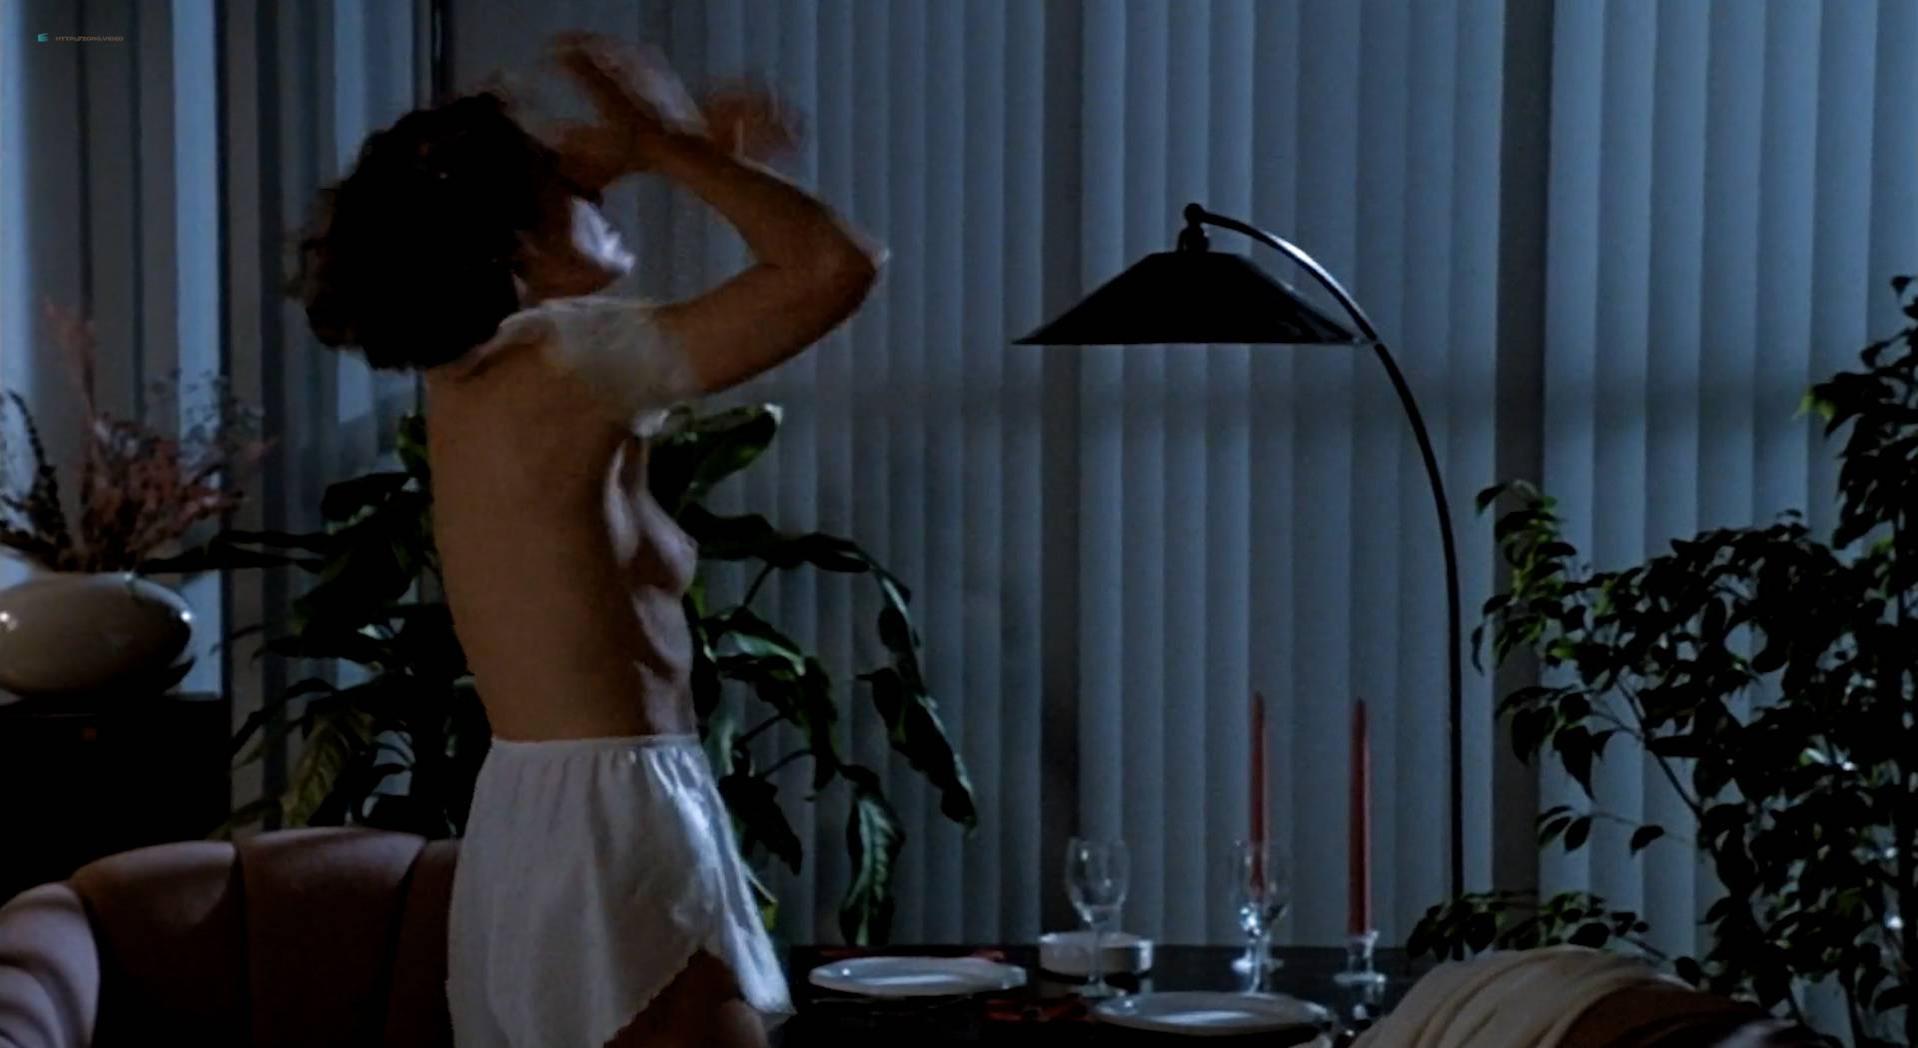 Jeremy Green nude, Lois Chiles nude - Creepshow 2 (1987)